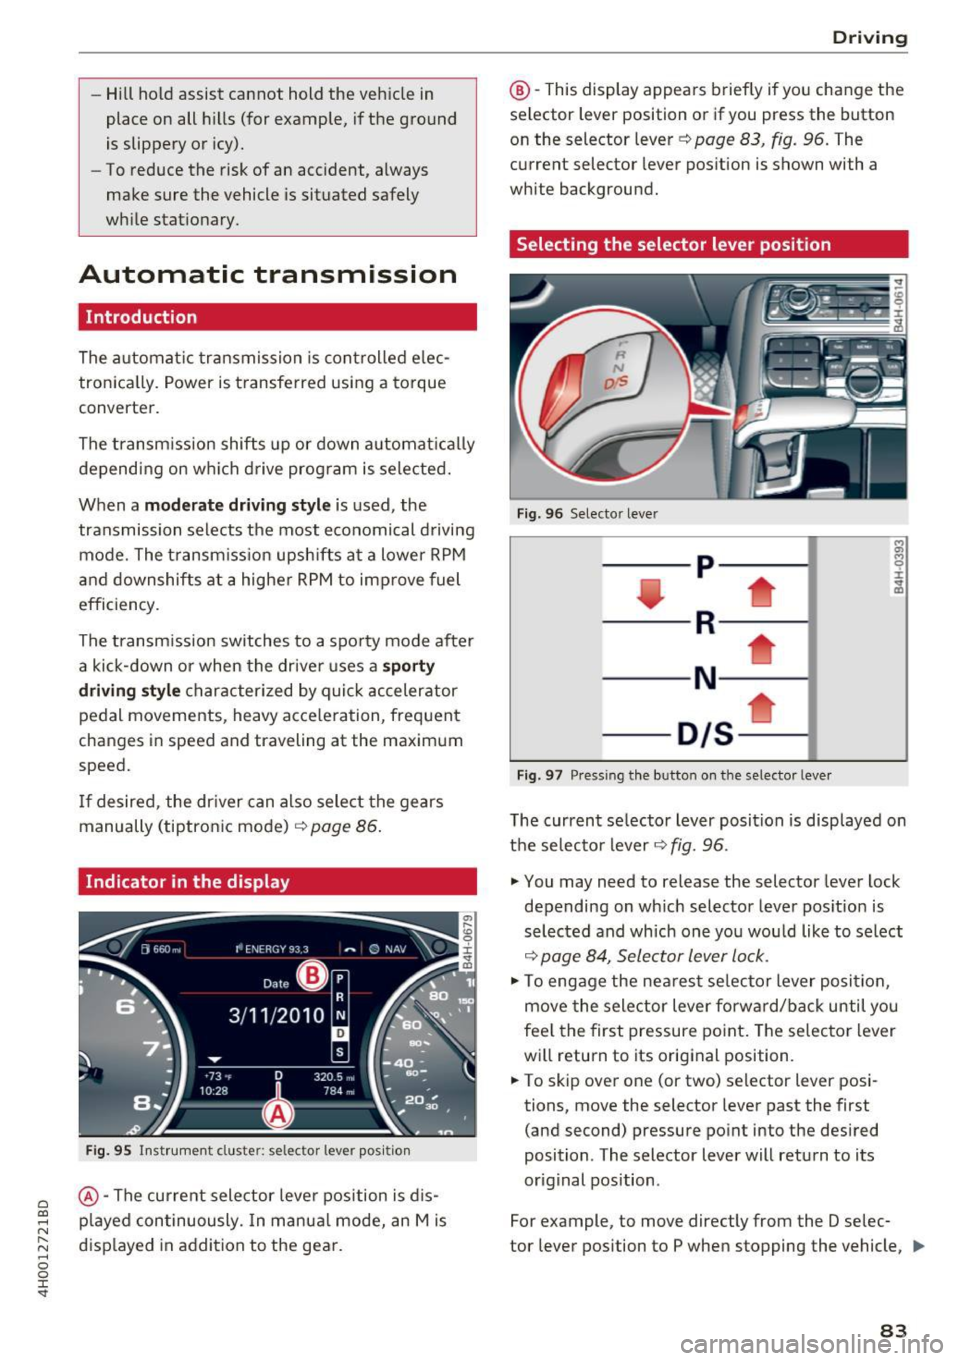 AUDI A8 2017  Owners Manual C) C0 .... 
" " " .... 0 0 :r <t 
-Hill hold  assist  cannot  hold  the  veh icle  in 
place  on  all  h ills  (for  example,  if the  ground 
is slippery  or  icy). 
- To reduce  the  risk of  an  